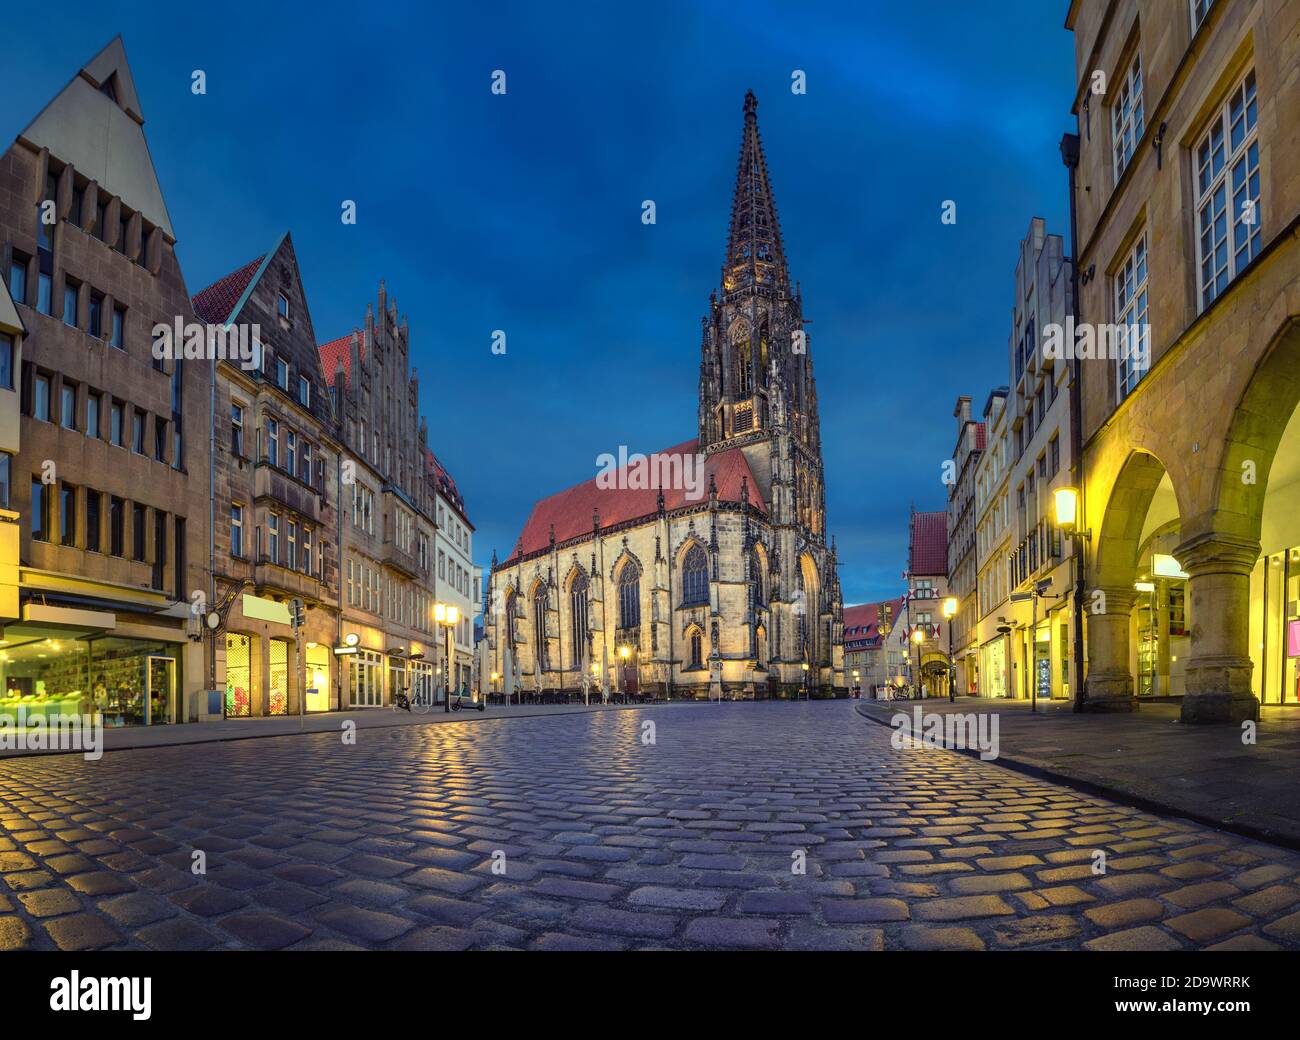 Munster, Germany. View of St Lambert's Church at dusk (HDR image) Stock Photo